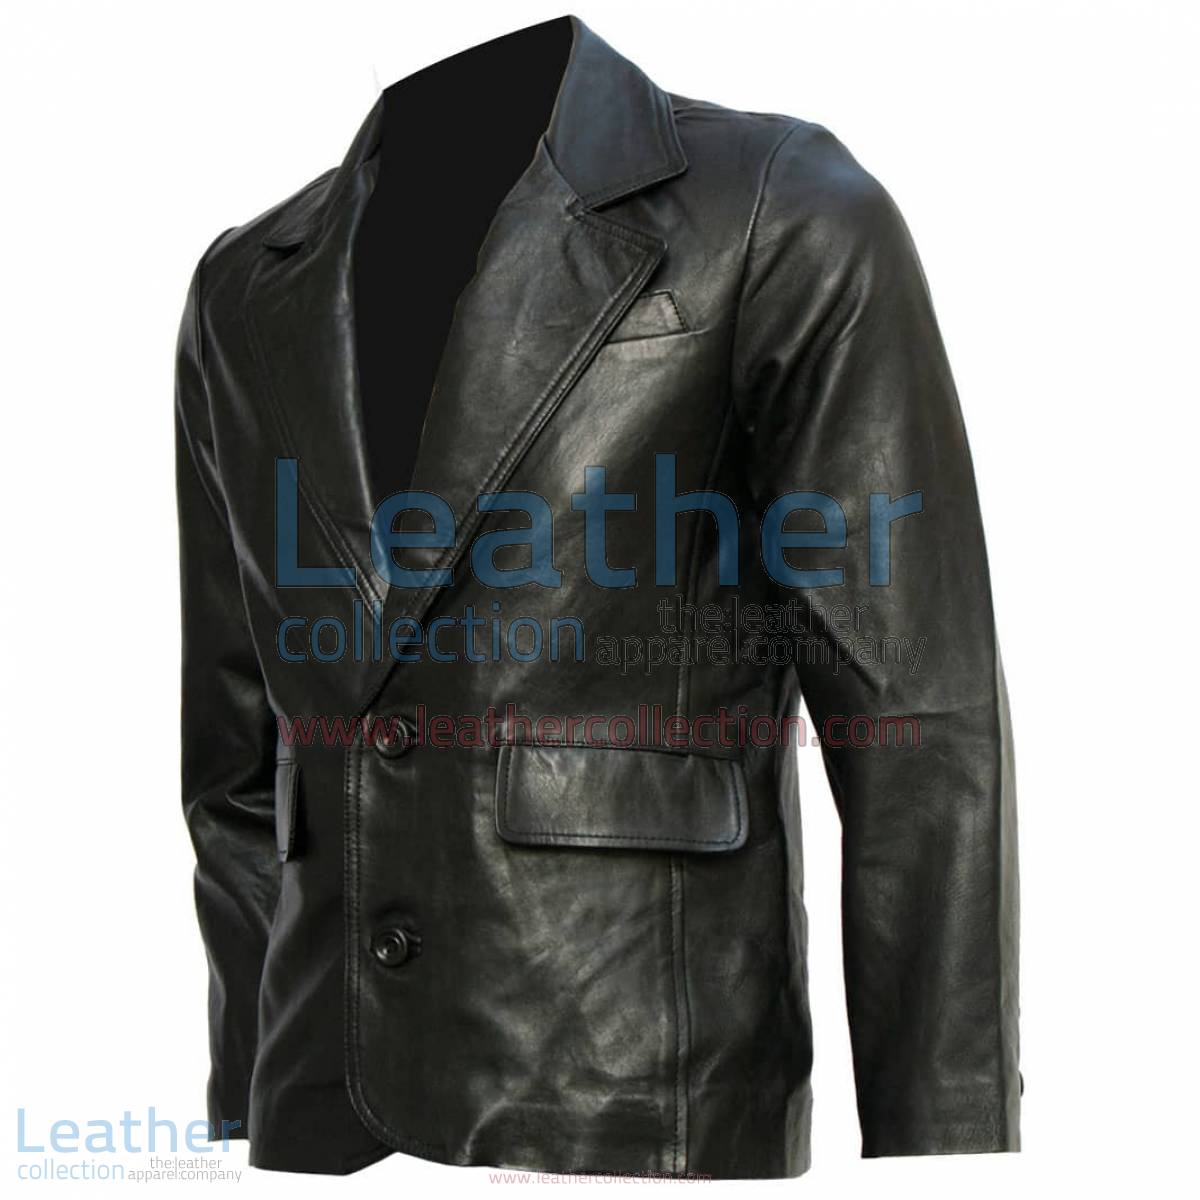 Mission Impossible Tom Cruise Black Leather Blazer | black leather blazer